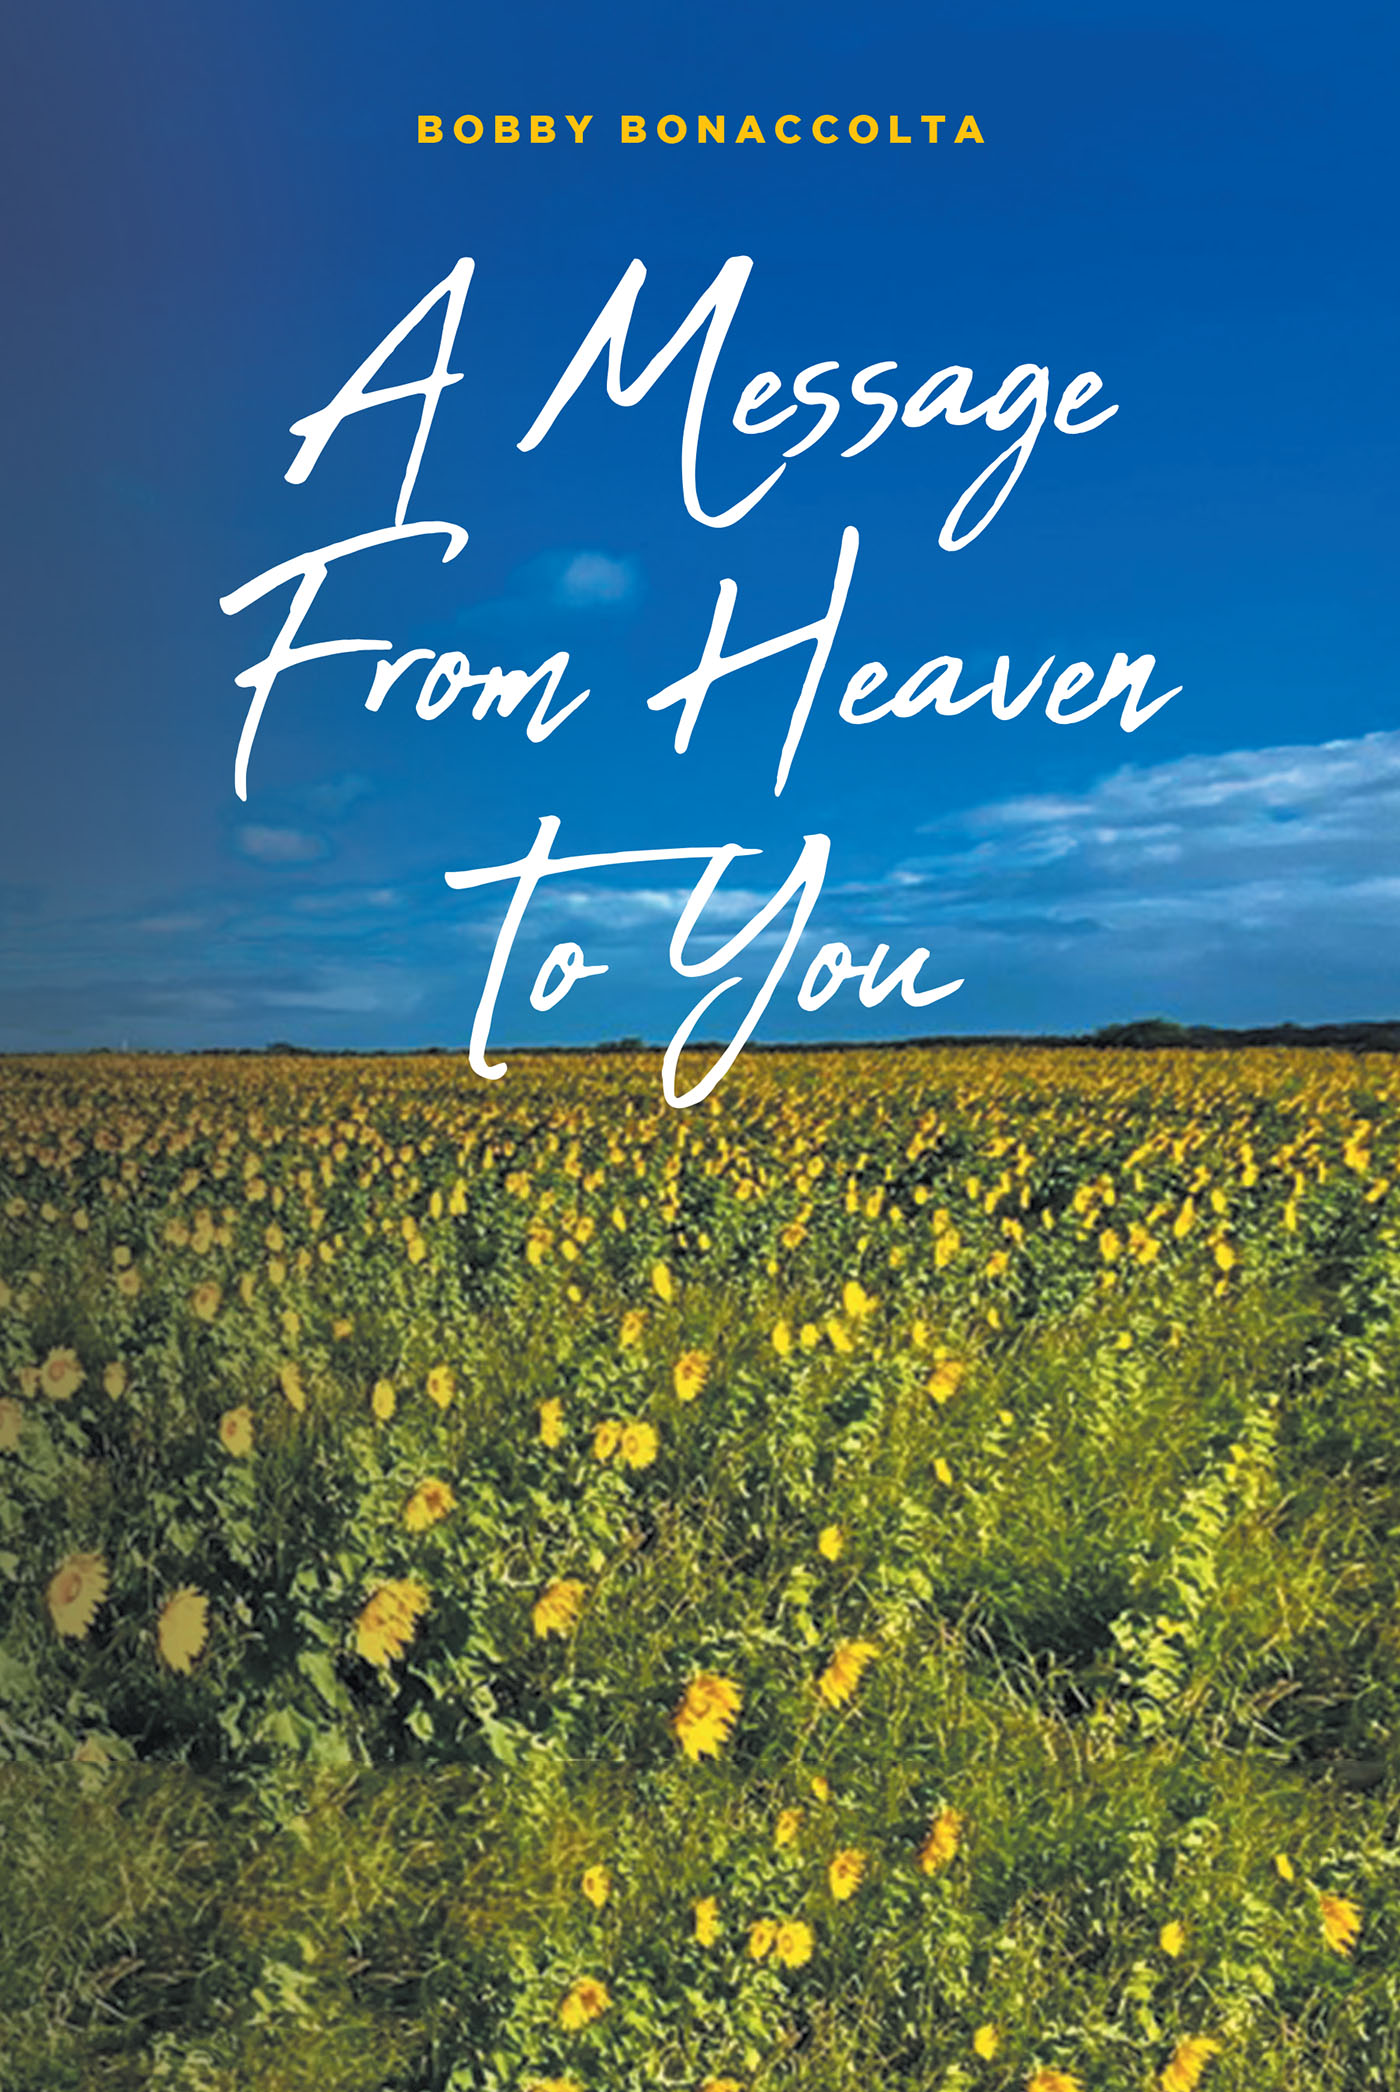 Bobby Bonaccolta’s Newly Released "A Message From Heaven To You" is a Spiritually Charged Memoir That Shares the Author’s Resolute Faith